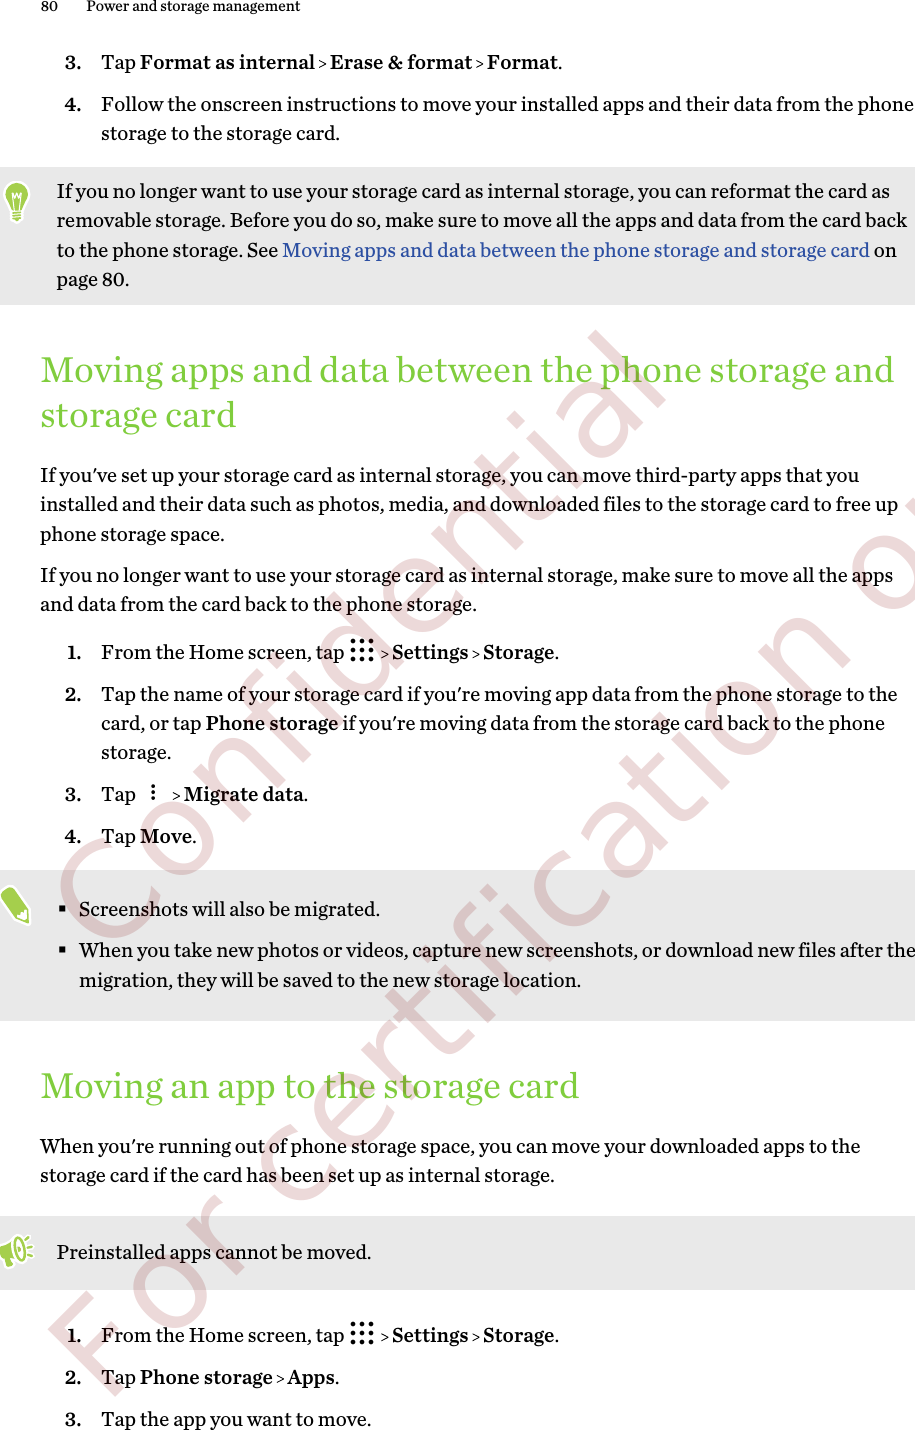 3. Tap Format as internal   Erase &amp; format   Format.4. Follow the onscreen instructions to move your installed apps and their data from the phonestorage to the storage card.If you no longer want to use your storage card as internal storage, you can reformat the card asremovable storage. Before you do so, make sure to move all the apps and data from the card backto the phone storage. See Moving apps and data between the phone storage and storage card onpage 80.Moving apps and data between the phone storage andstorage cardIf you&apos;ve set up your storage card as internal storage, you can move third-party apps that youinstalled and their data such as photos, media, and downloaded files to the storage card to free upphone storage space.If you no longer want to use your storage card as internal storage, make sure to move all the appsand data from the card back to the phone storage.1. From the Home screen, tap     Settings   Storage.2. Tap the name of your storage card if you&apos;re moving app data from the phone storage to thecard, or tap Phone storage if you&apos;re moving data from the storage card back to the phonestorage.3. Tap     Migrate data.4. Tap Move.§Screenshots will also be migrated.§When you take new photos or videos, capture new screenshots, or download new files after themigration, they will be saved to the new storage location.Moving an app to the storage cardWhen you&apos;re running out of phone storage space, you can move your downloaded apps to thestorage card if the card has been set up as internal storage.Preinstalled apps cannot be moved.1. From the Home screen, tap     Settings   Storage.2. Tap Phone storage   Apps.3. Tap the app you want to move.80 Power and storage management        Confidential  For certification only